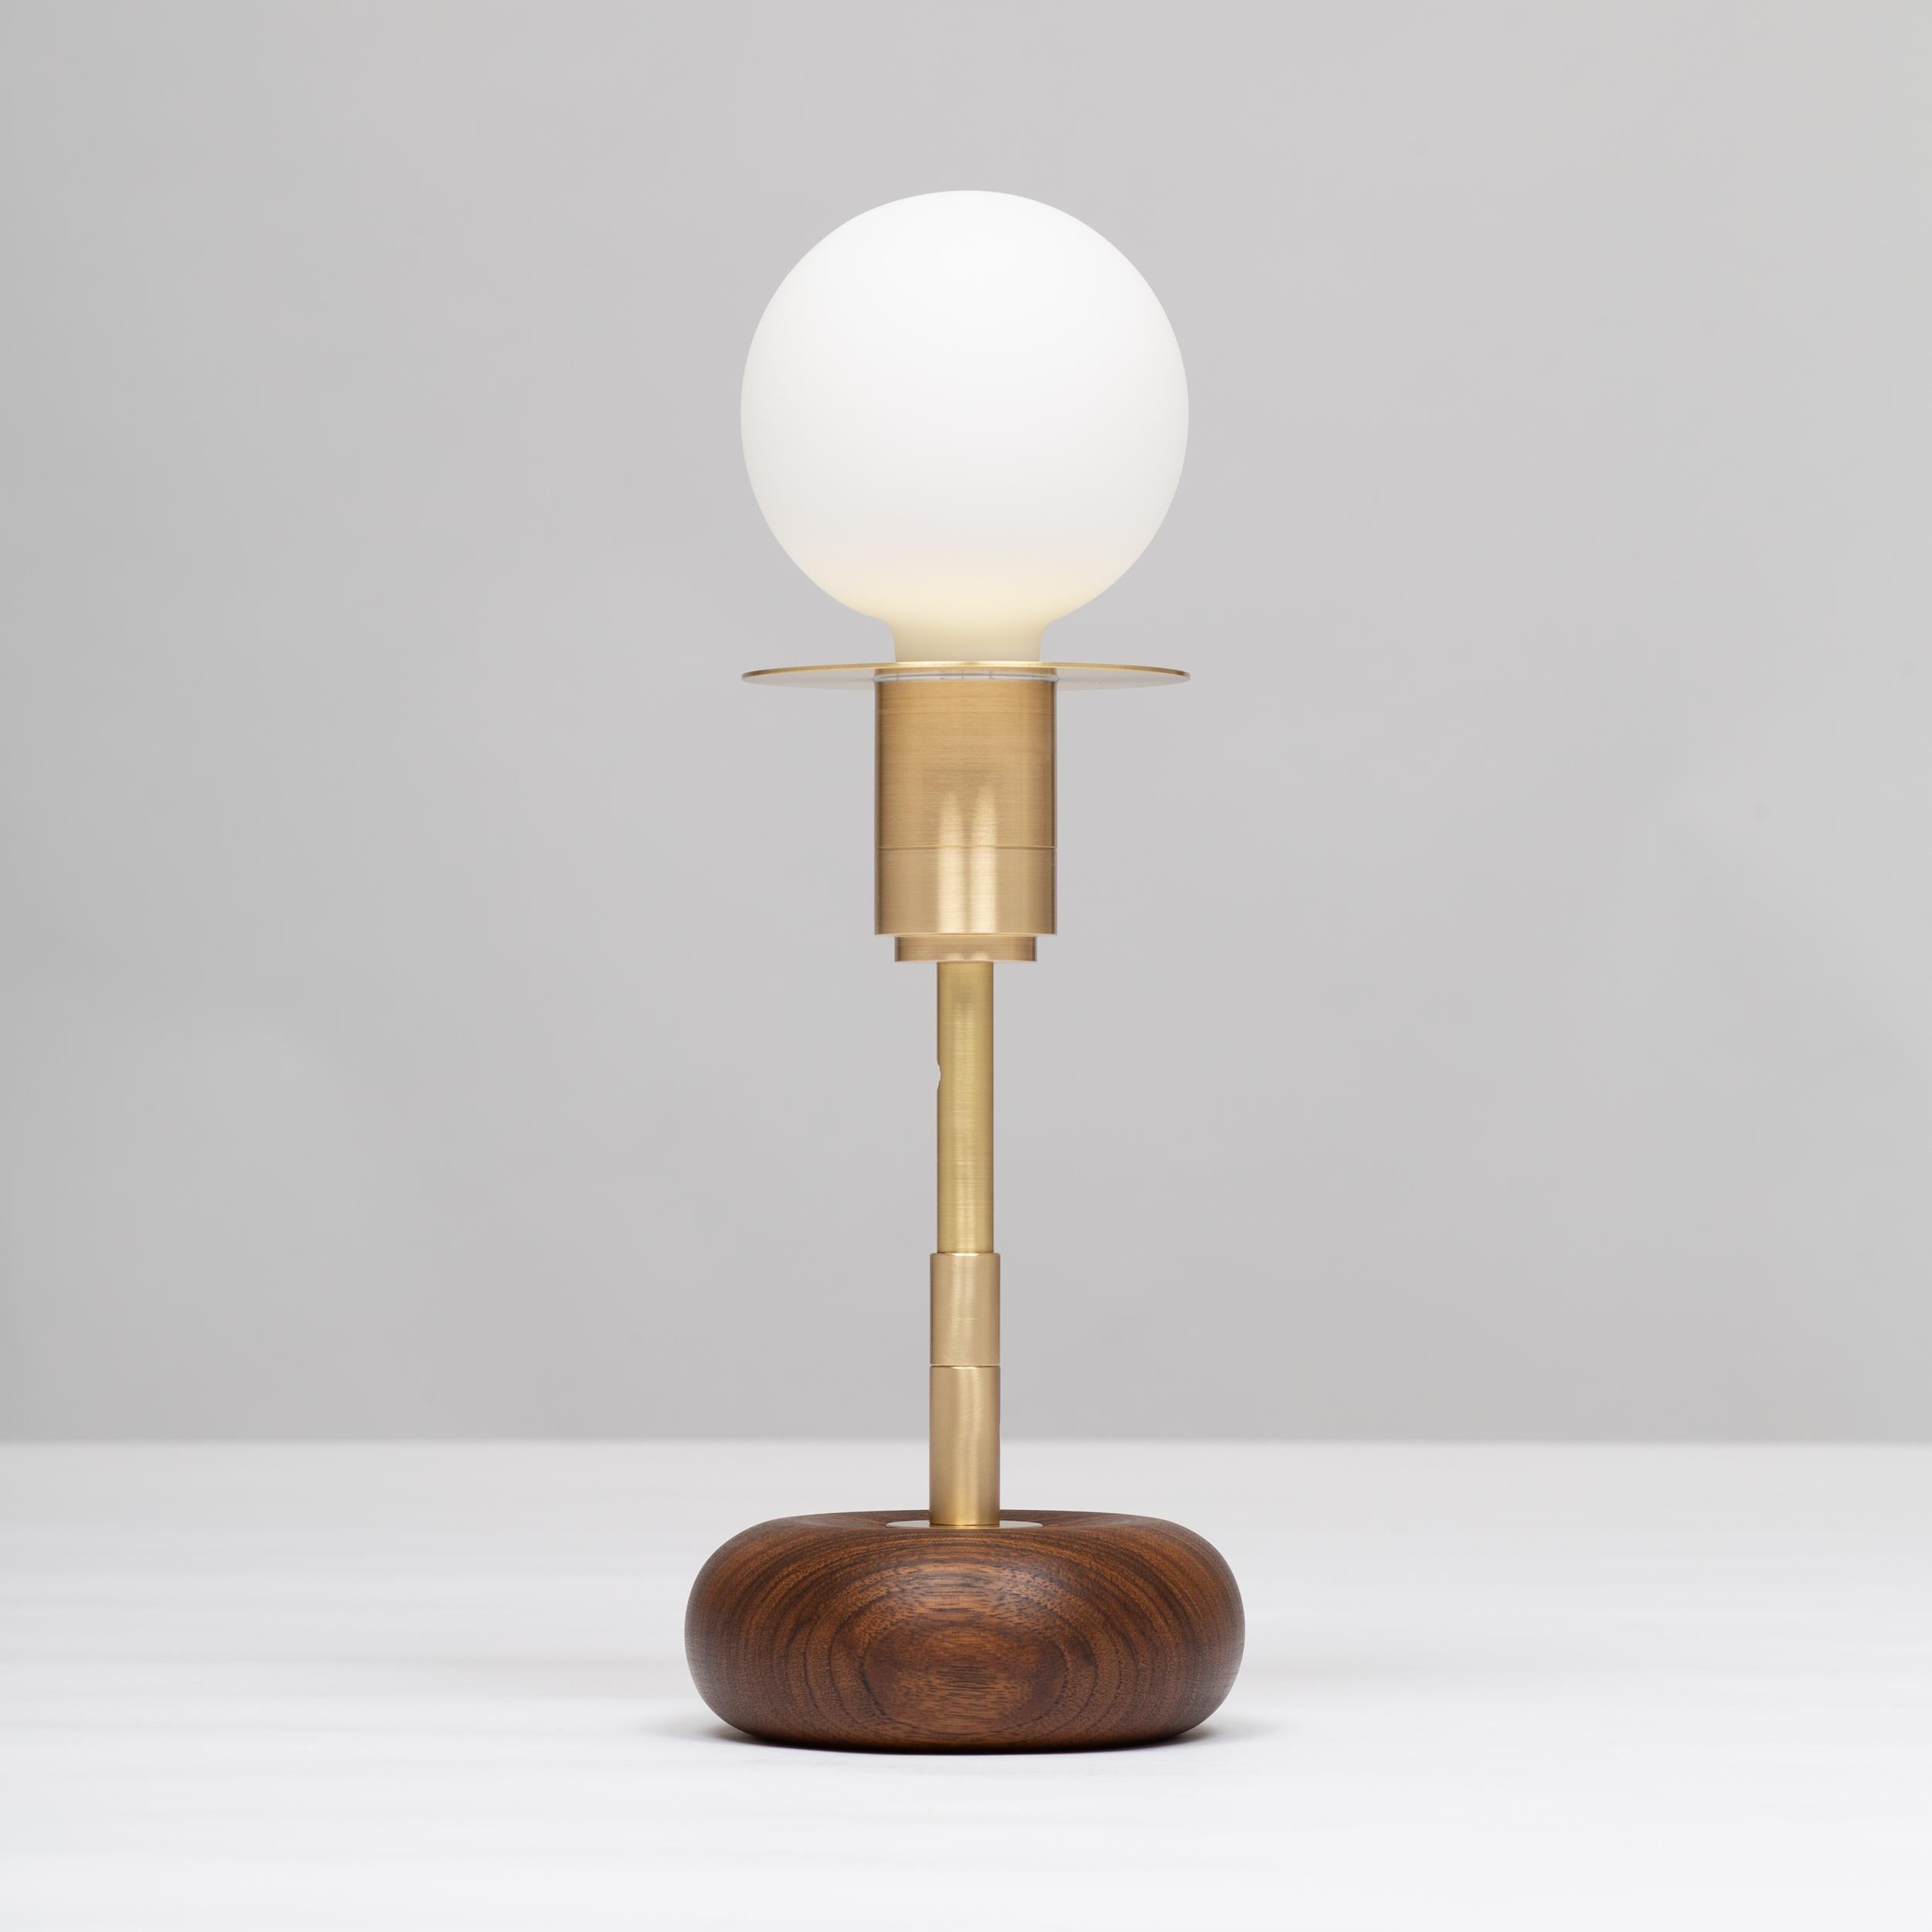 Handturned Walnut Pebble Table Lamp. Pure Monocoat natural oil finish.
Solid brass, Satin finish. Spun Brass Disc. Lacquered. 
Inline LED dimmer. Linen Fabric Cable.
2000K - 2800K  95CRI
600 Dim to Warm Lumens
Sphere III bulb included
Smoke Oak,